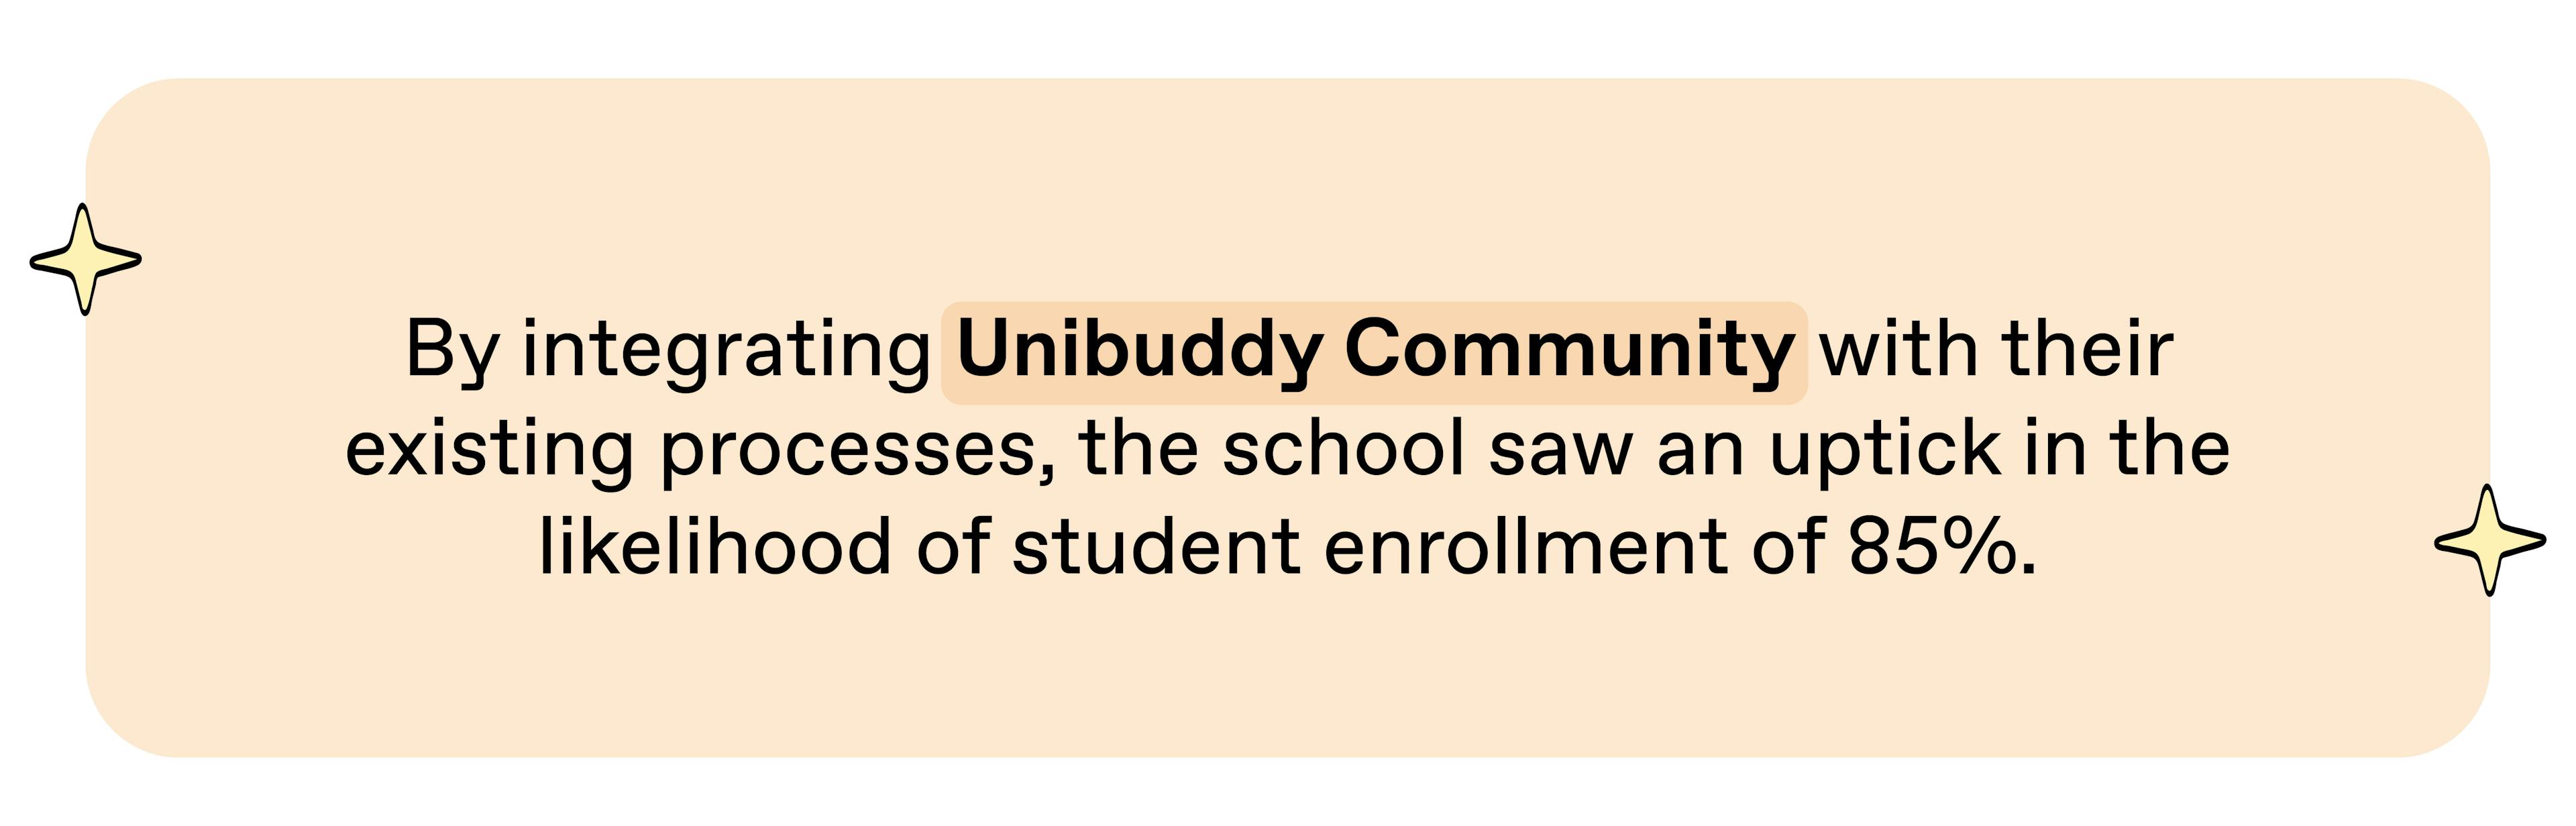 orange graphic reading "By integrating Unibuddy Community with their existing processes, the school saw an uptick in the likelihood of student ensrollment of 85%"